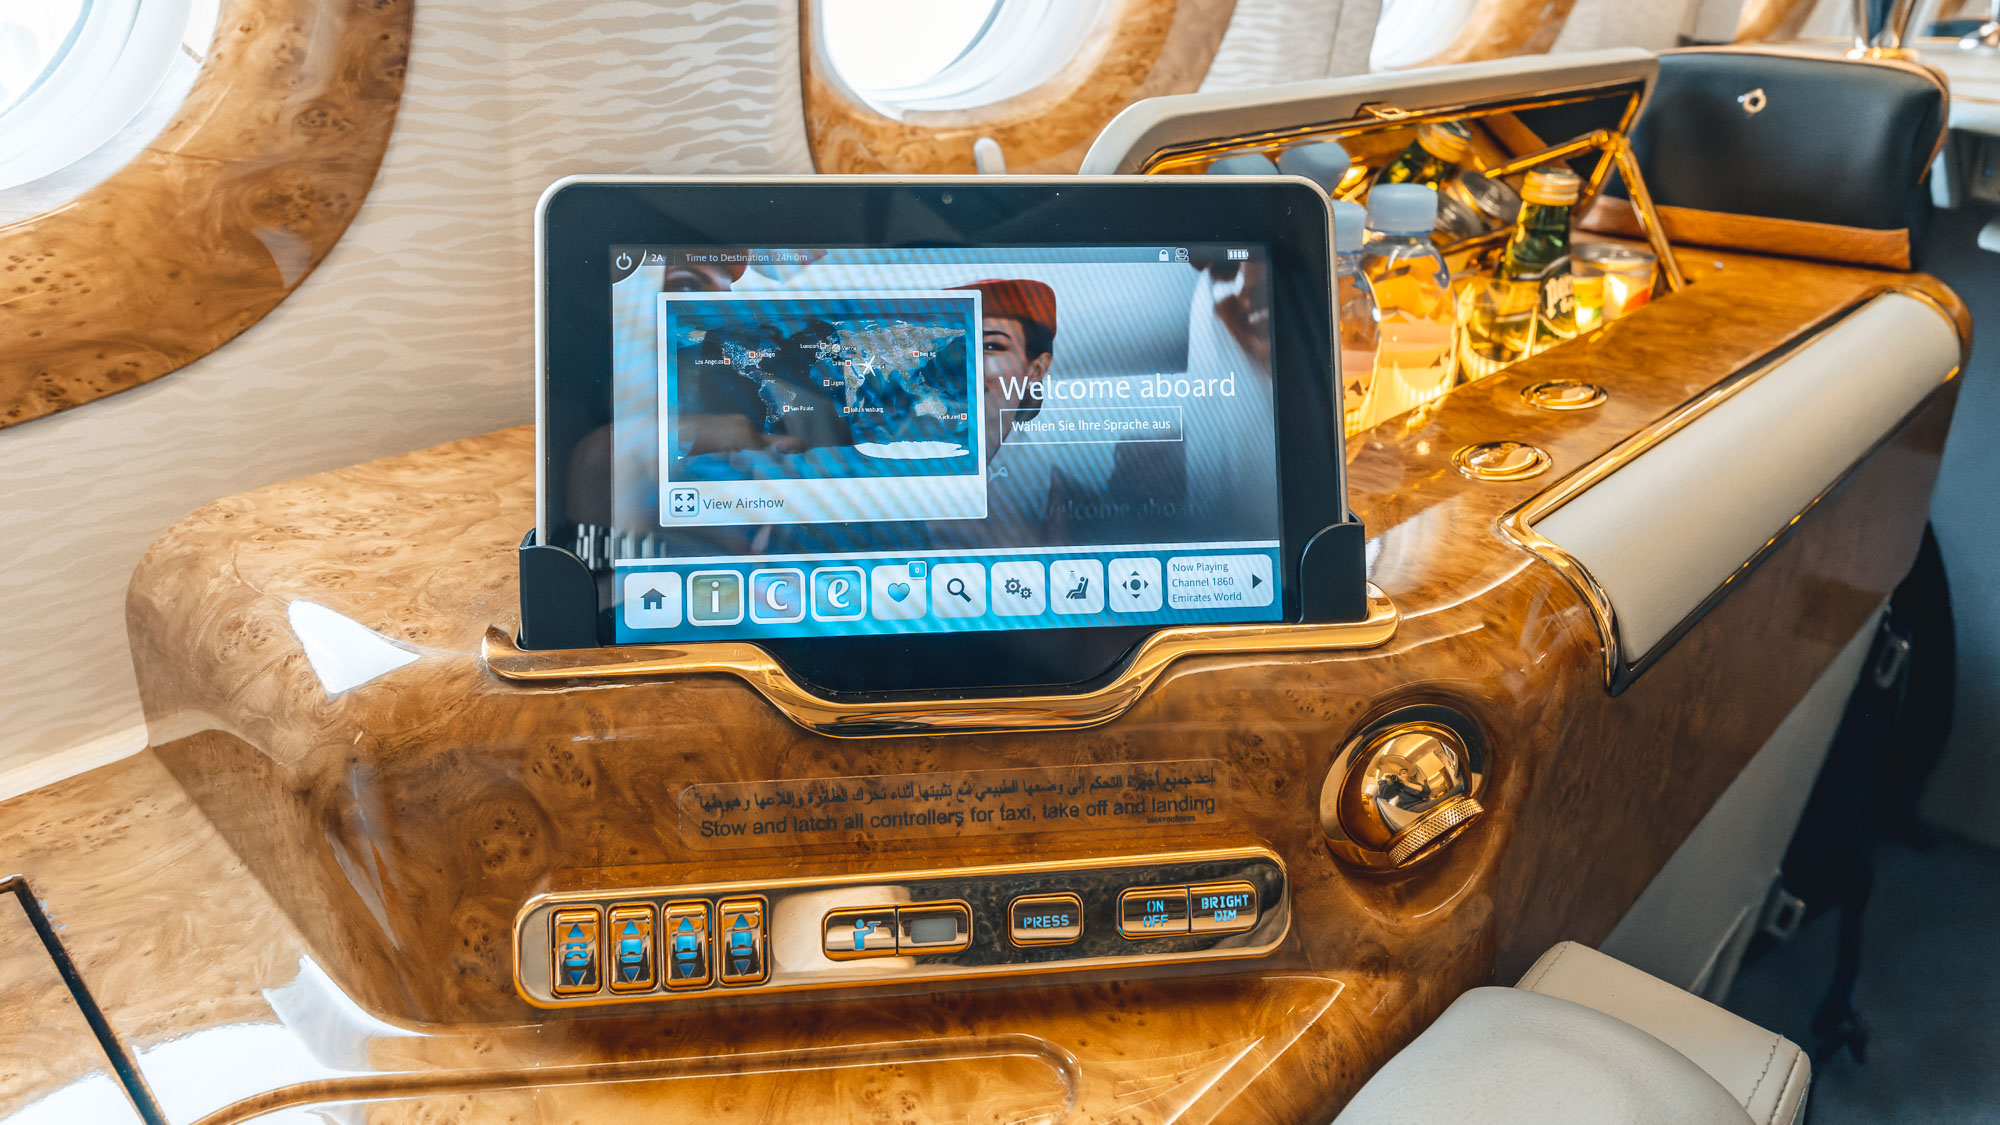 Emirates Boeing 777 First Class tablet